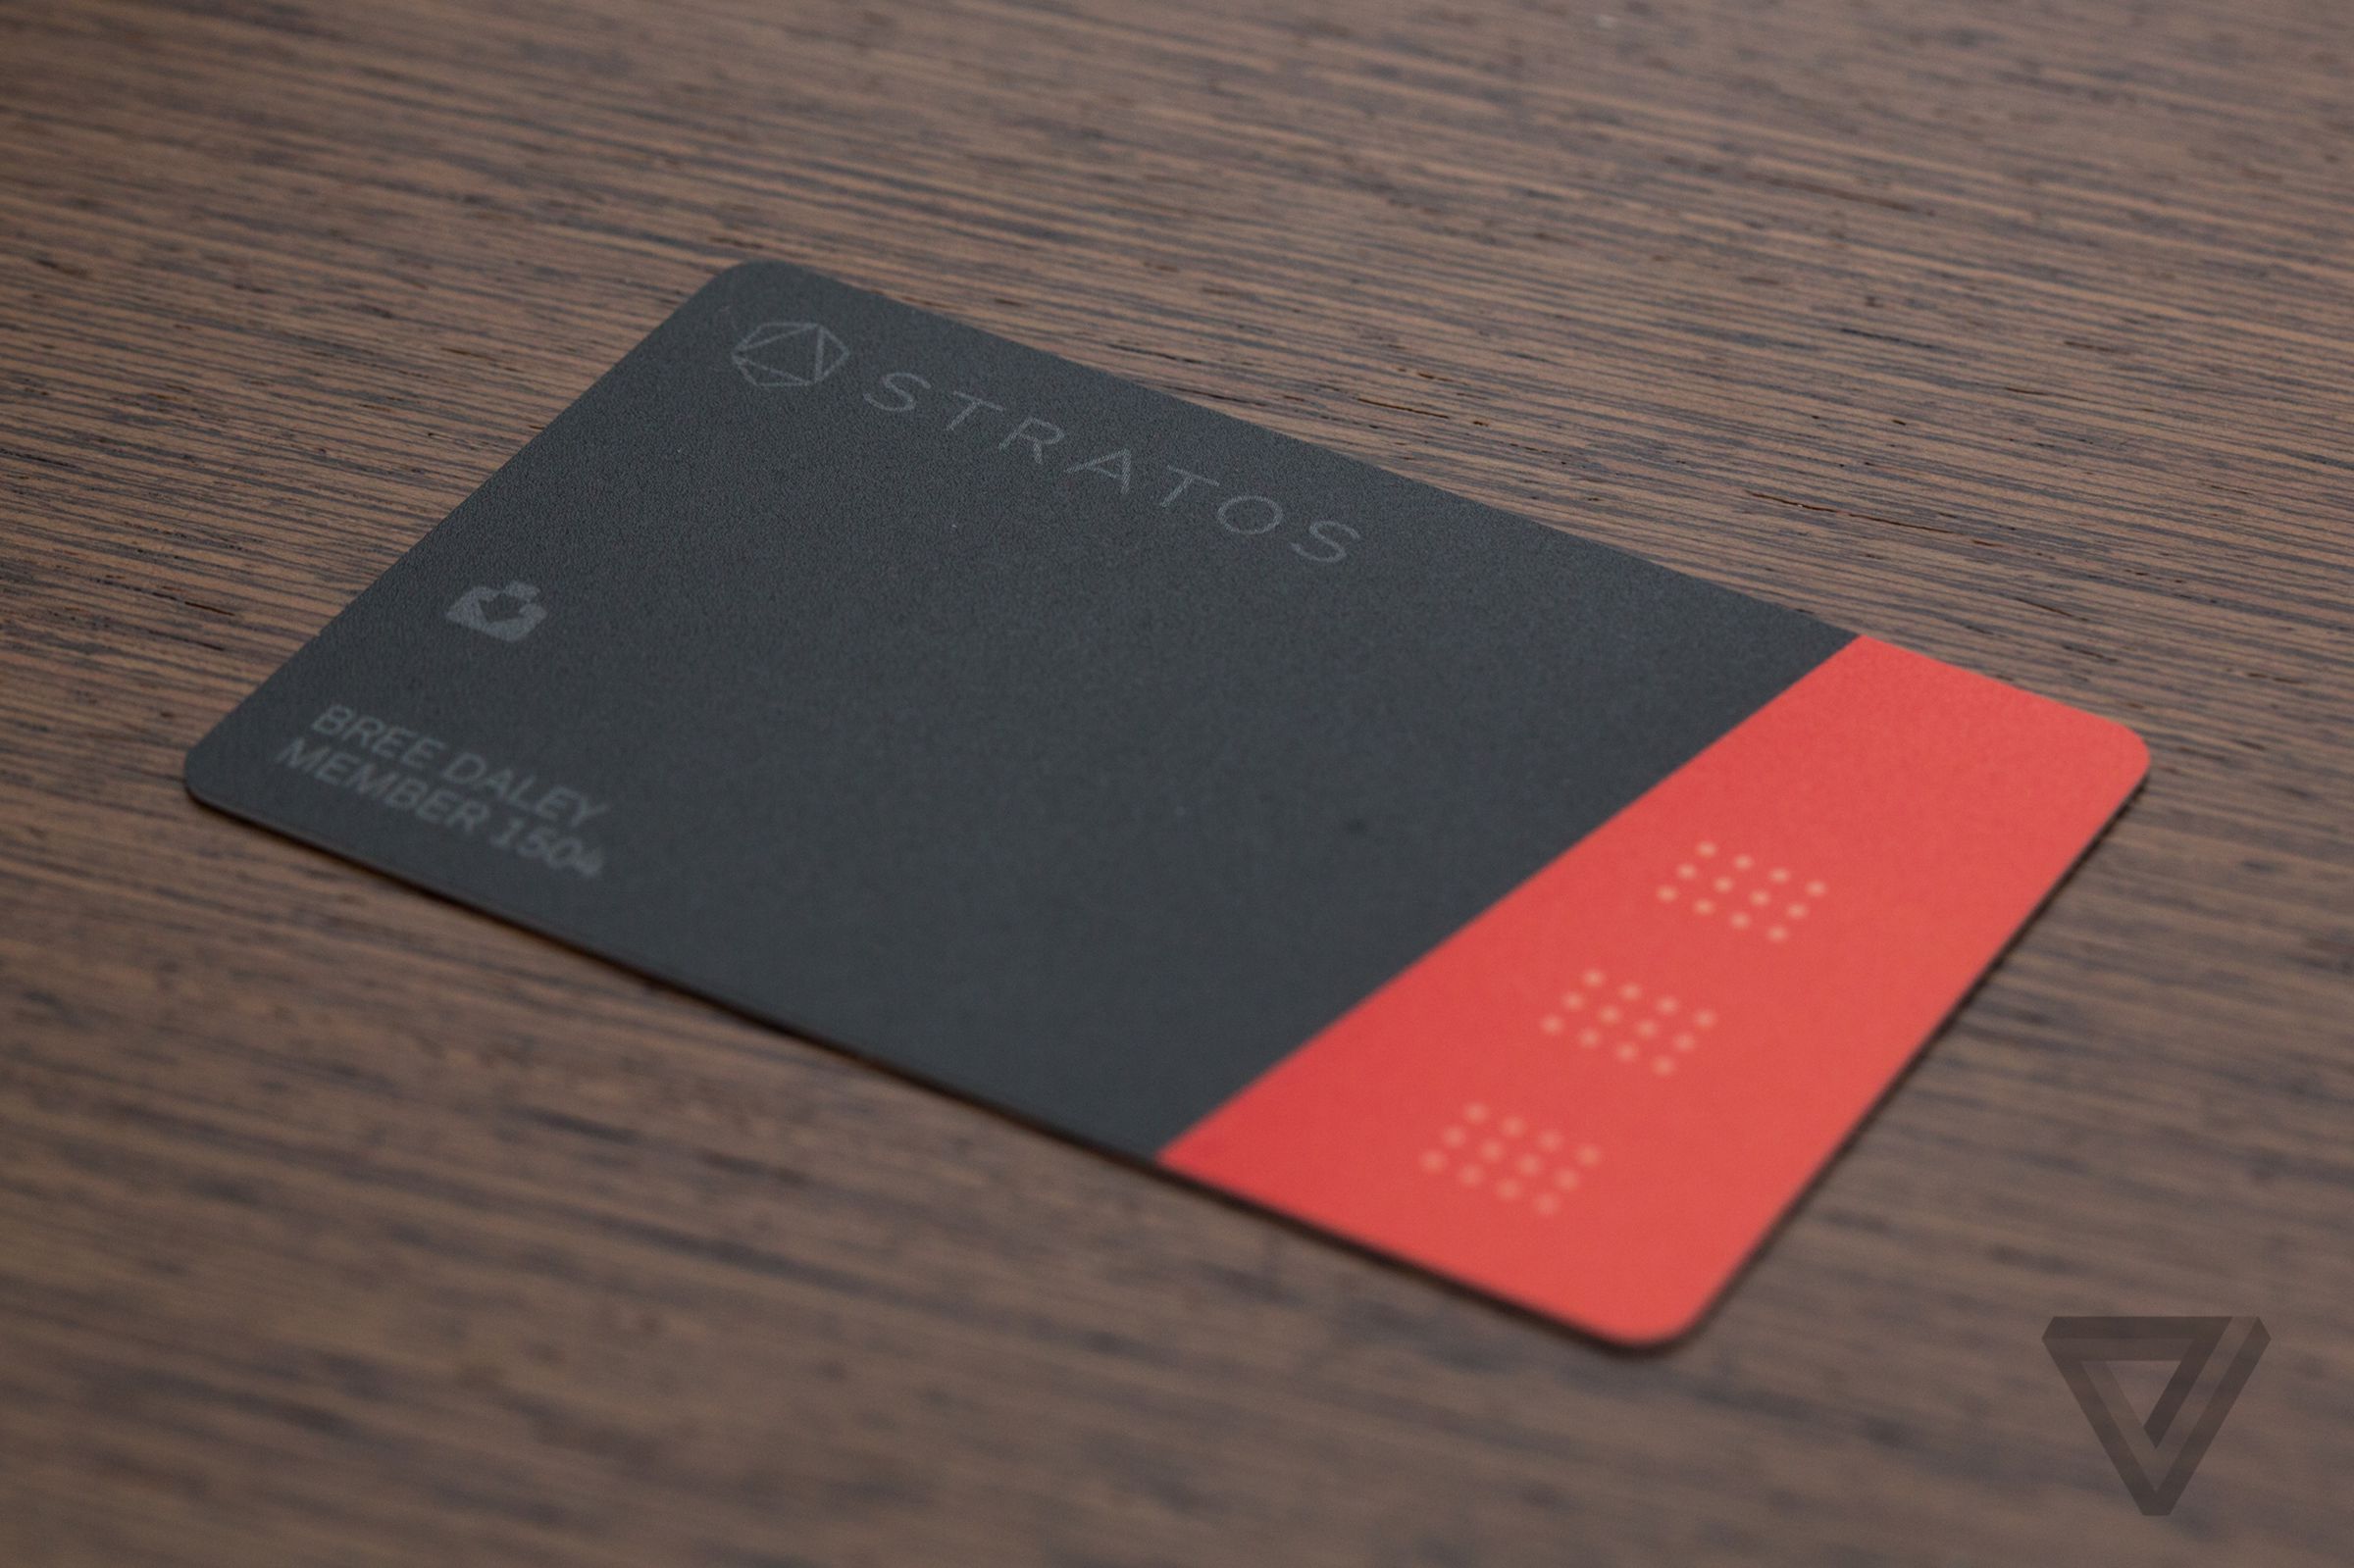 Stratos card hands-on 